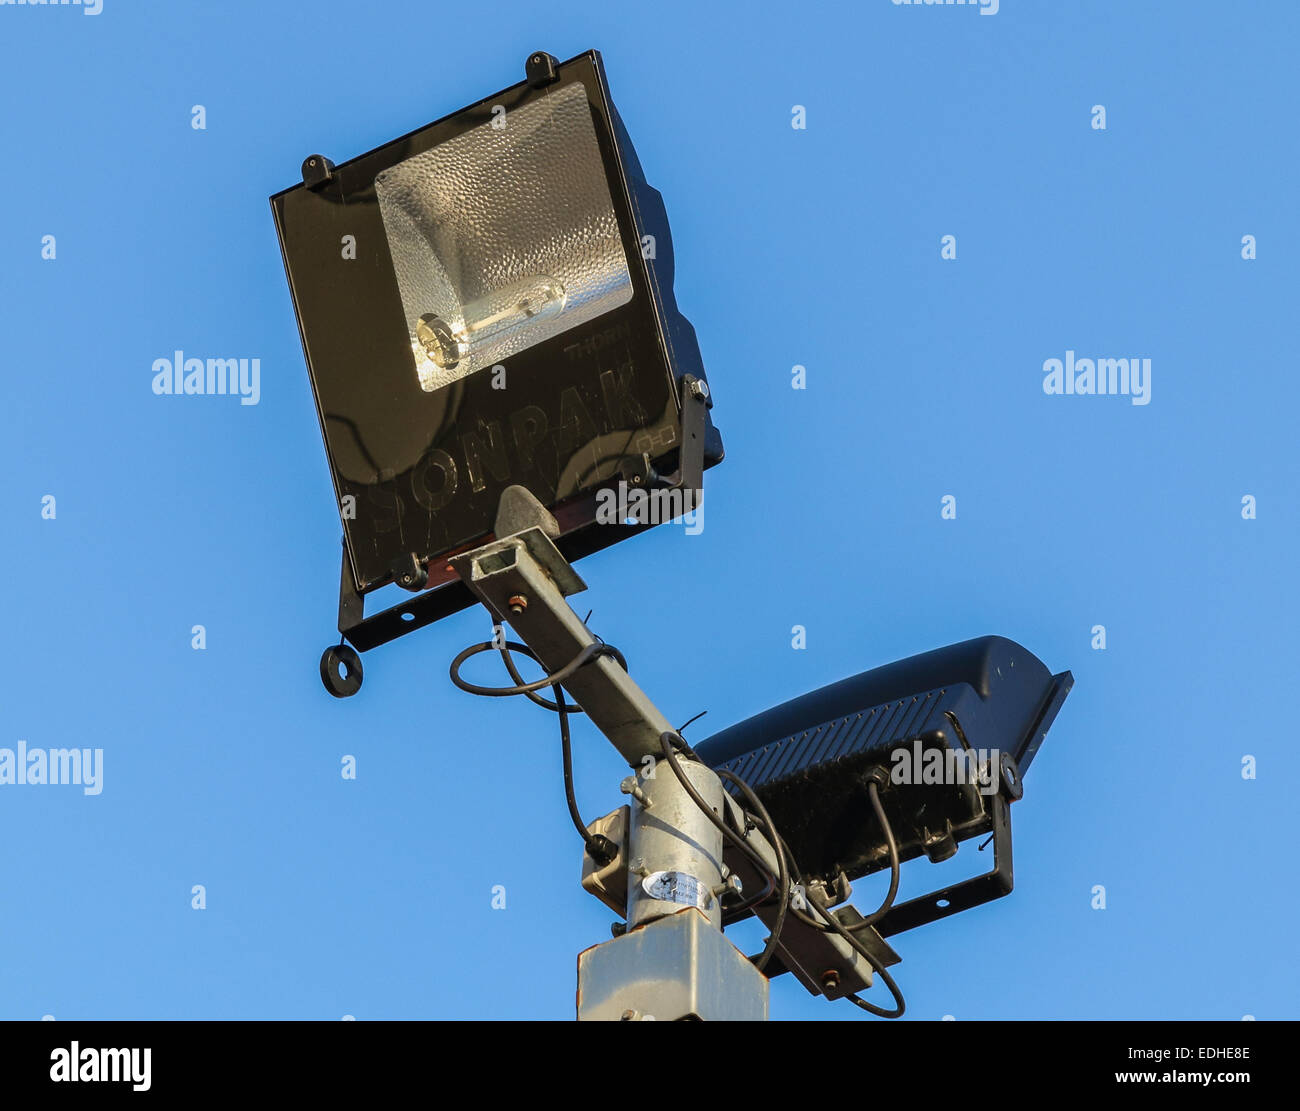 Security floodlights on a tall post against a winter blue sky at a UK shopping centre or shopping mall. Stock Photo